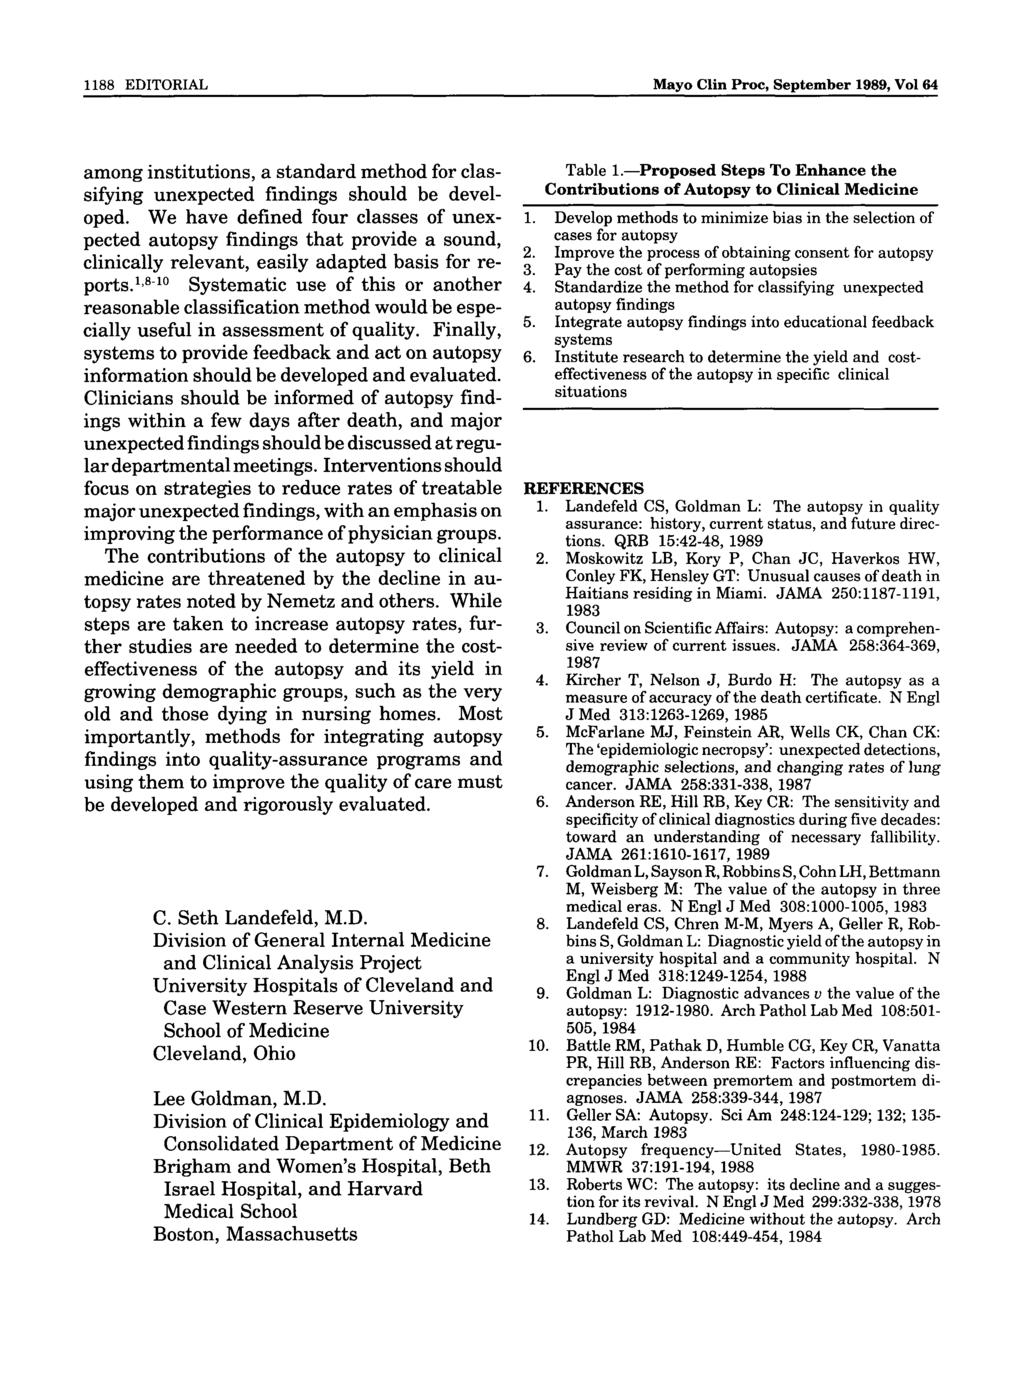 1188 EDITORIAL Mayo Clin Proc, September 1989, Vol 64 among institutions, a standard method for classifying unexpected findings should be developed.